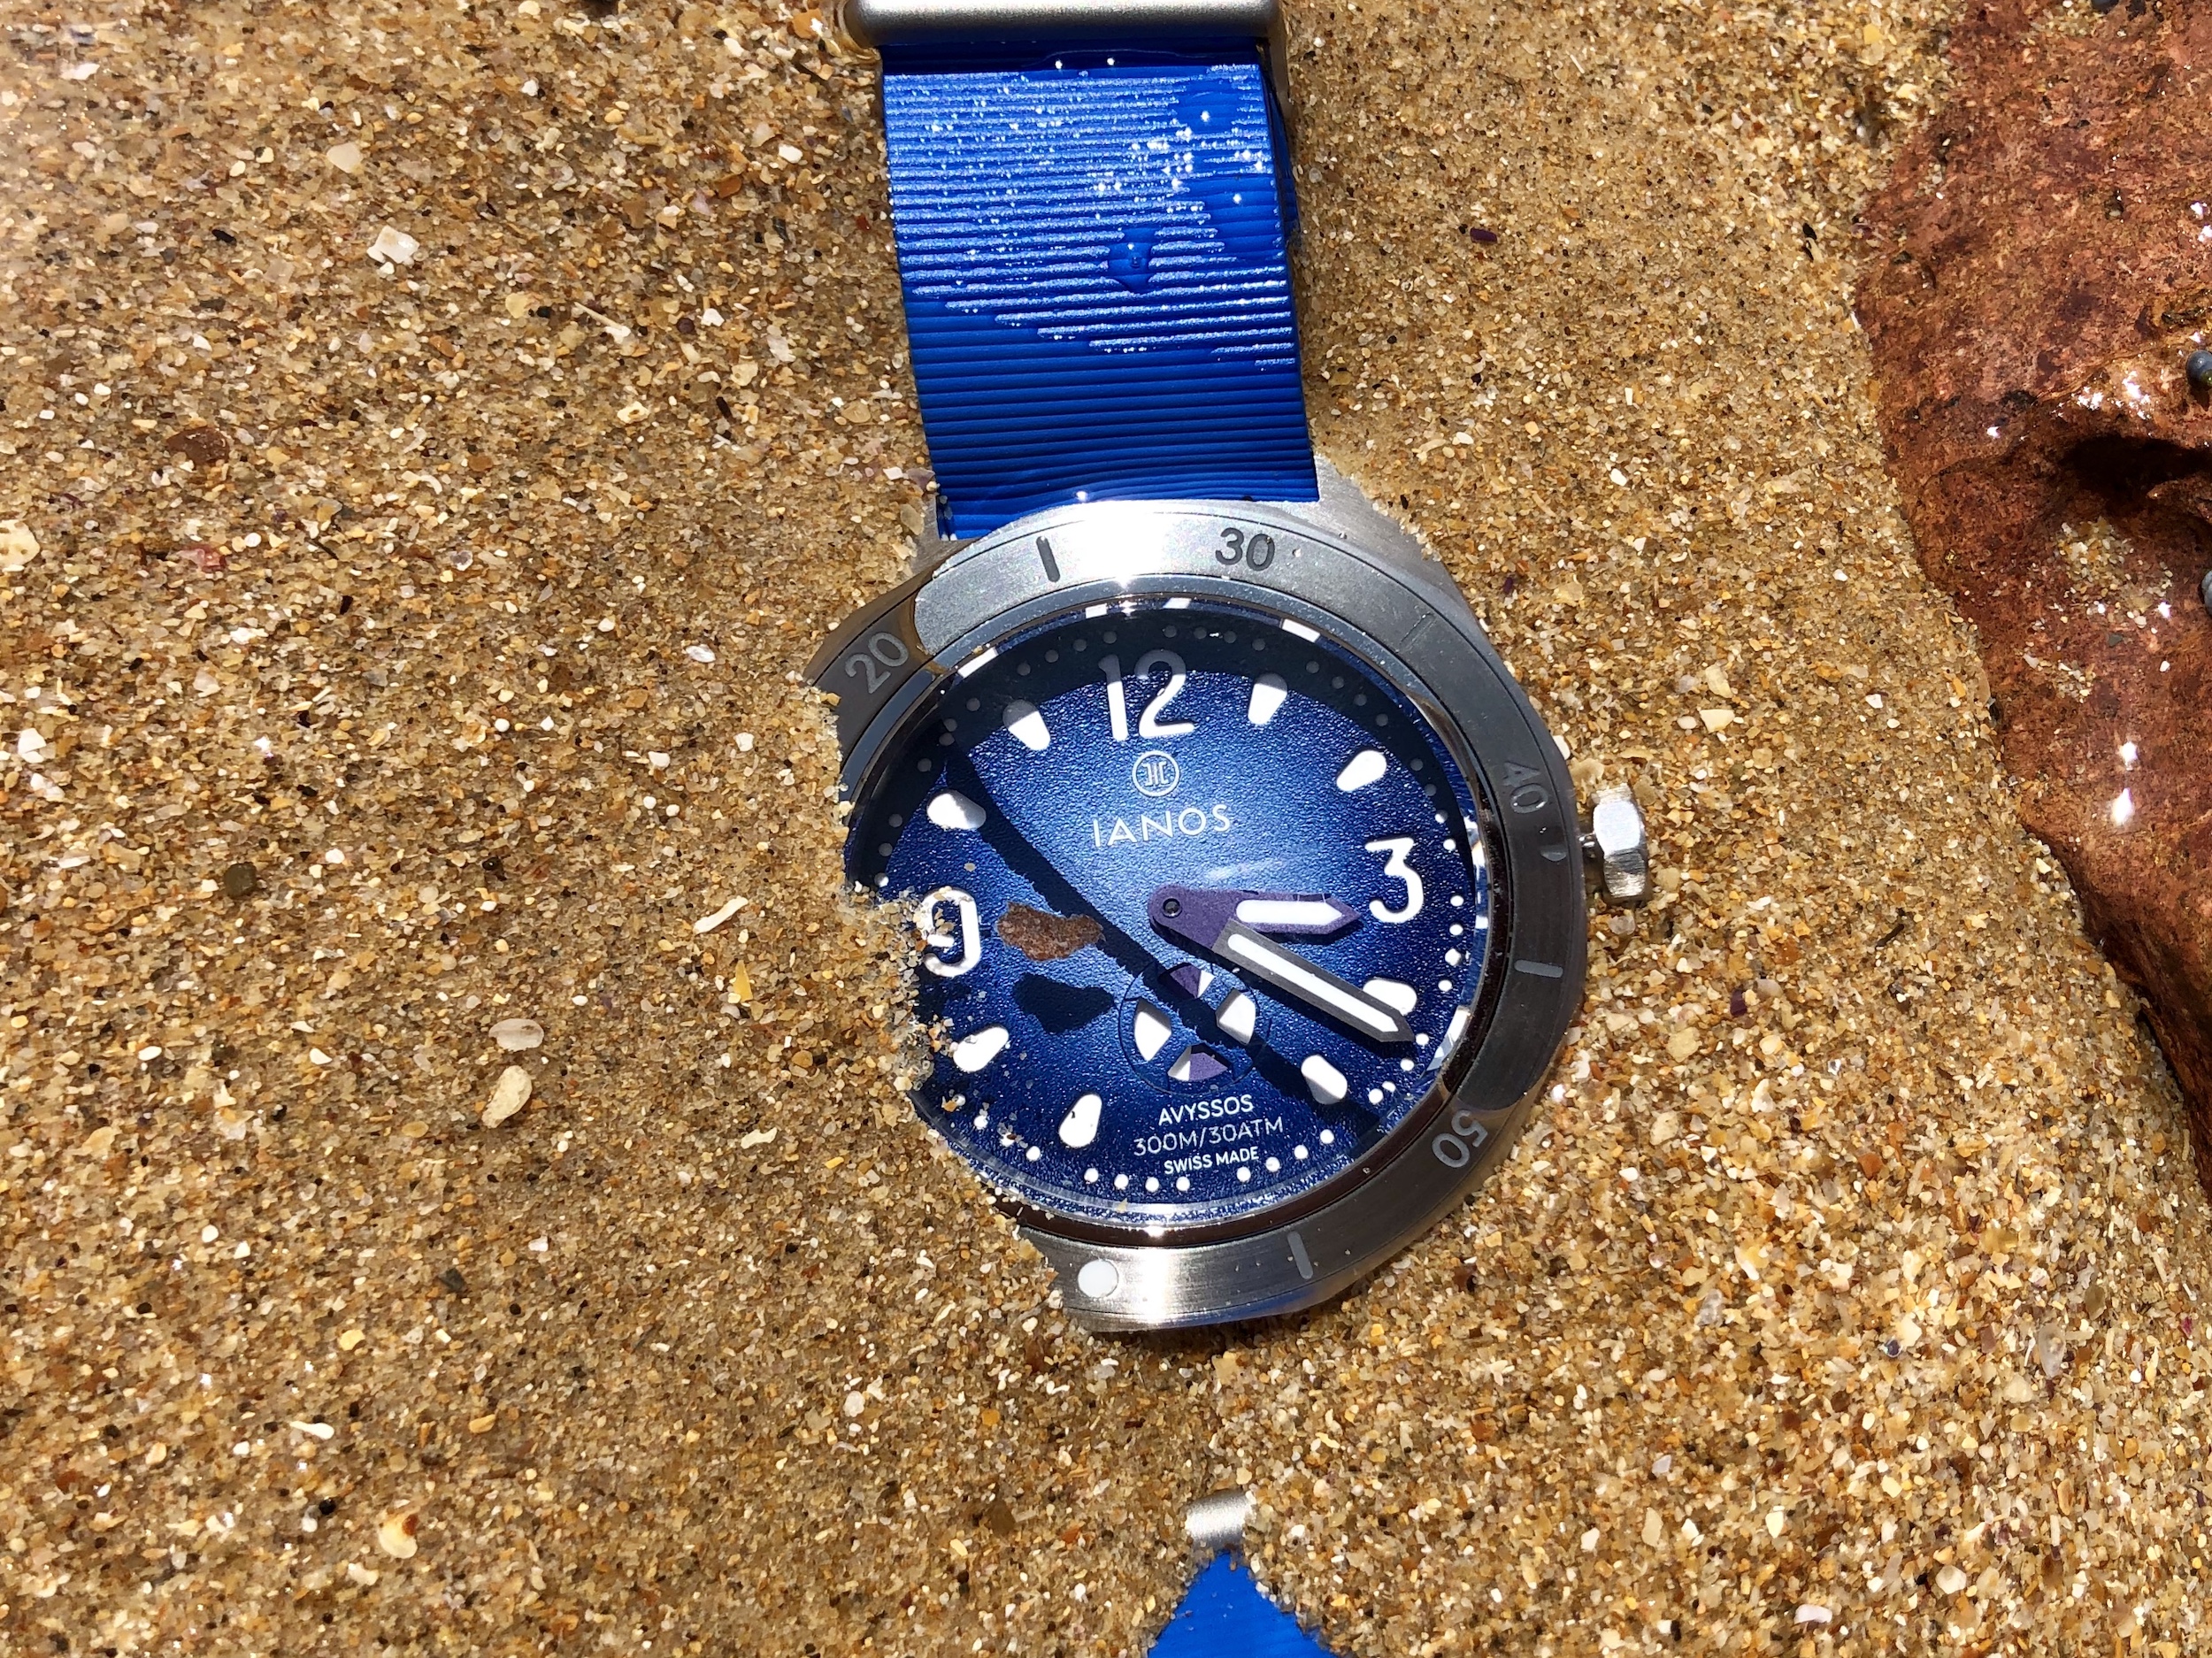 Owner Review: The Ianos Avyssos is a Dive watch you must sea to believe.